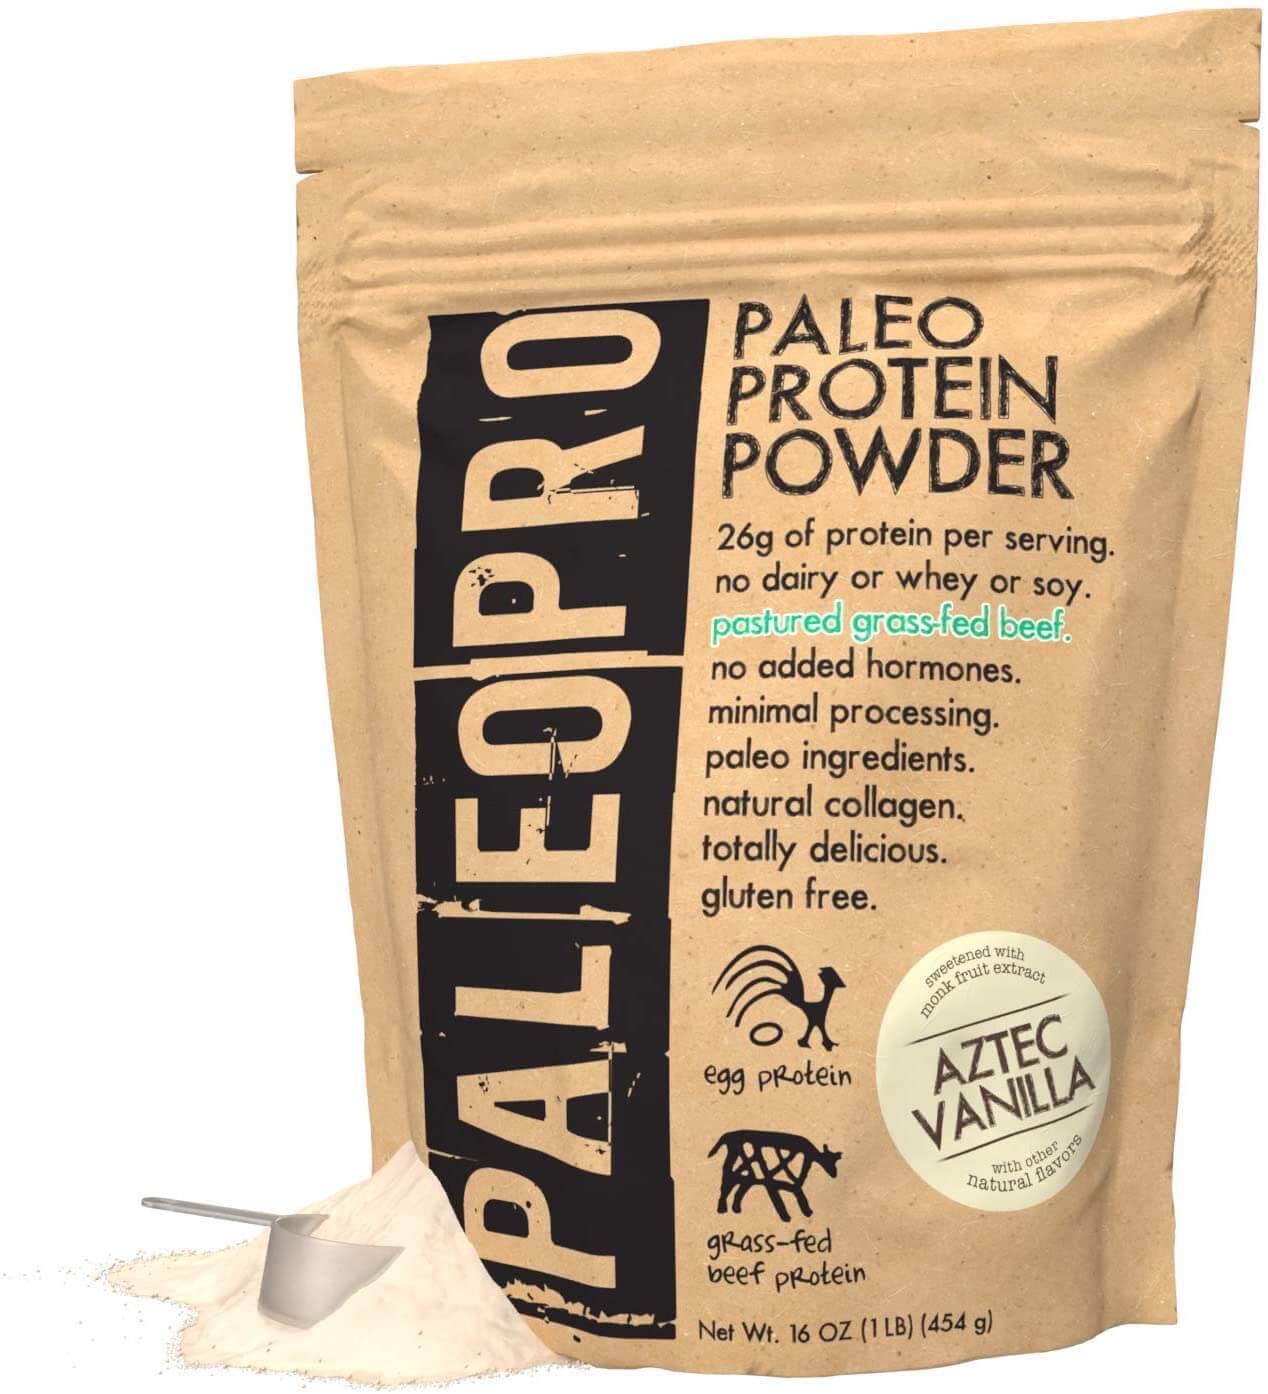 PaleoPro Meal Replacement Protein Shake Review